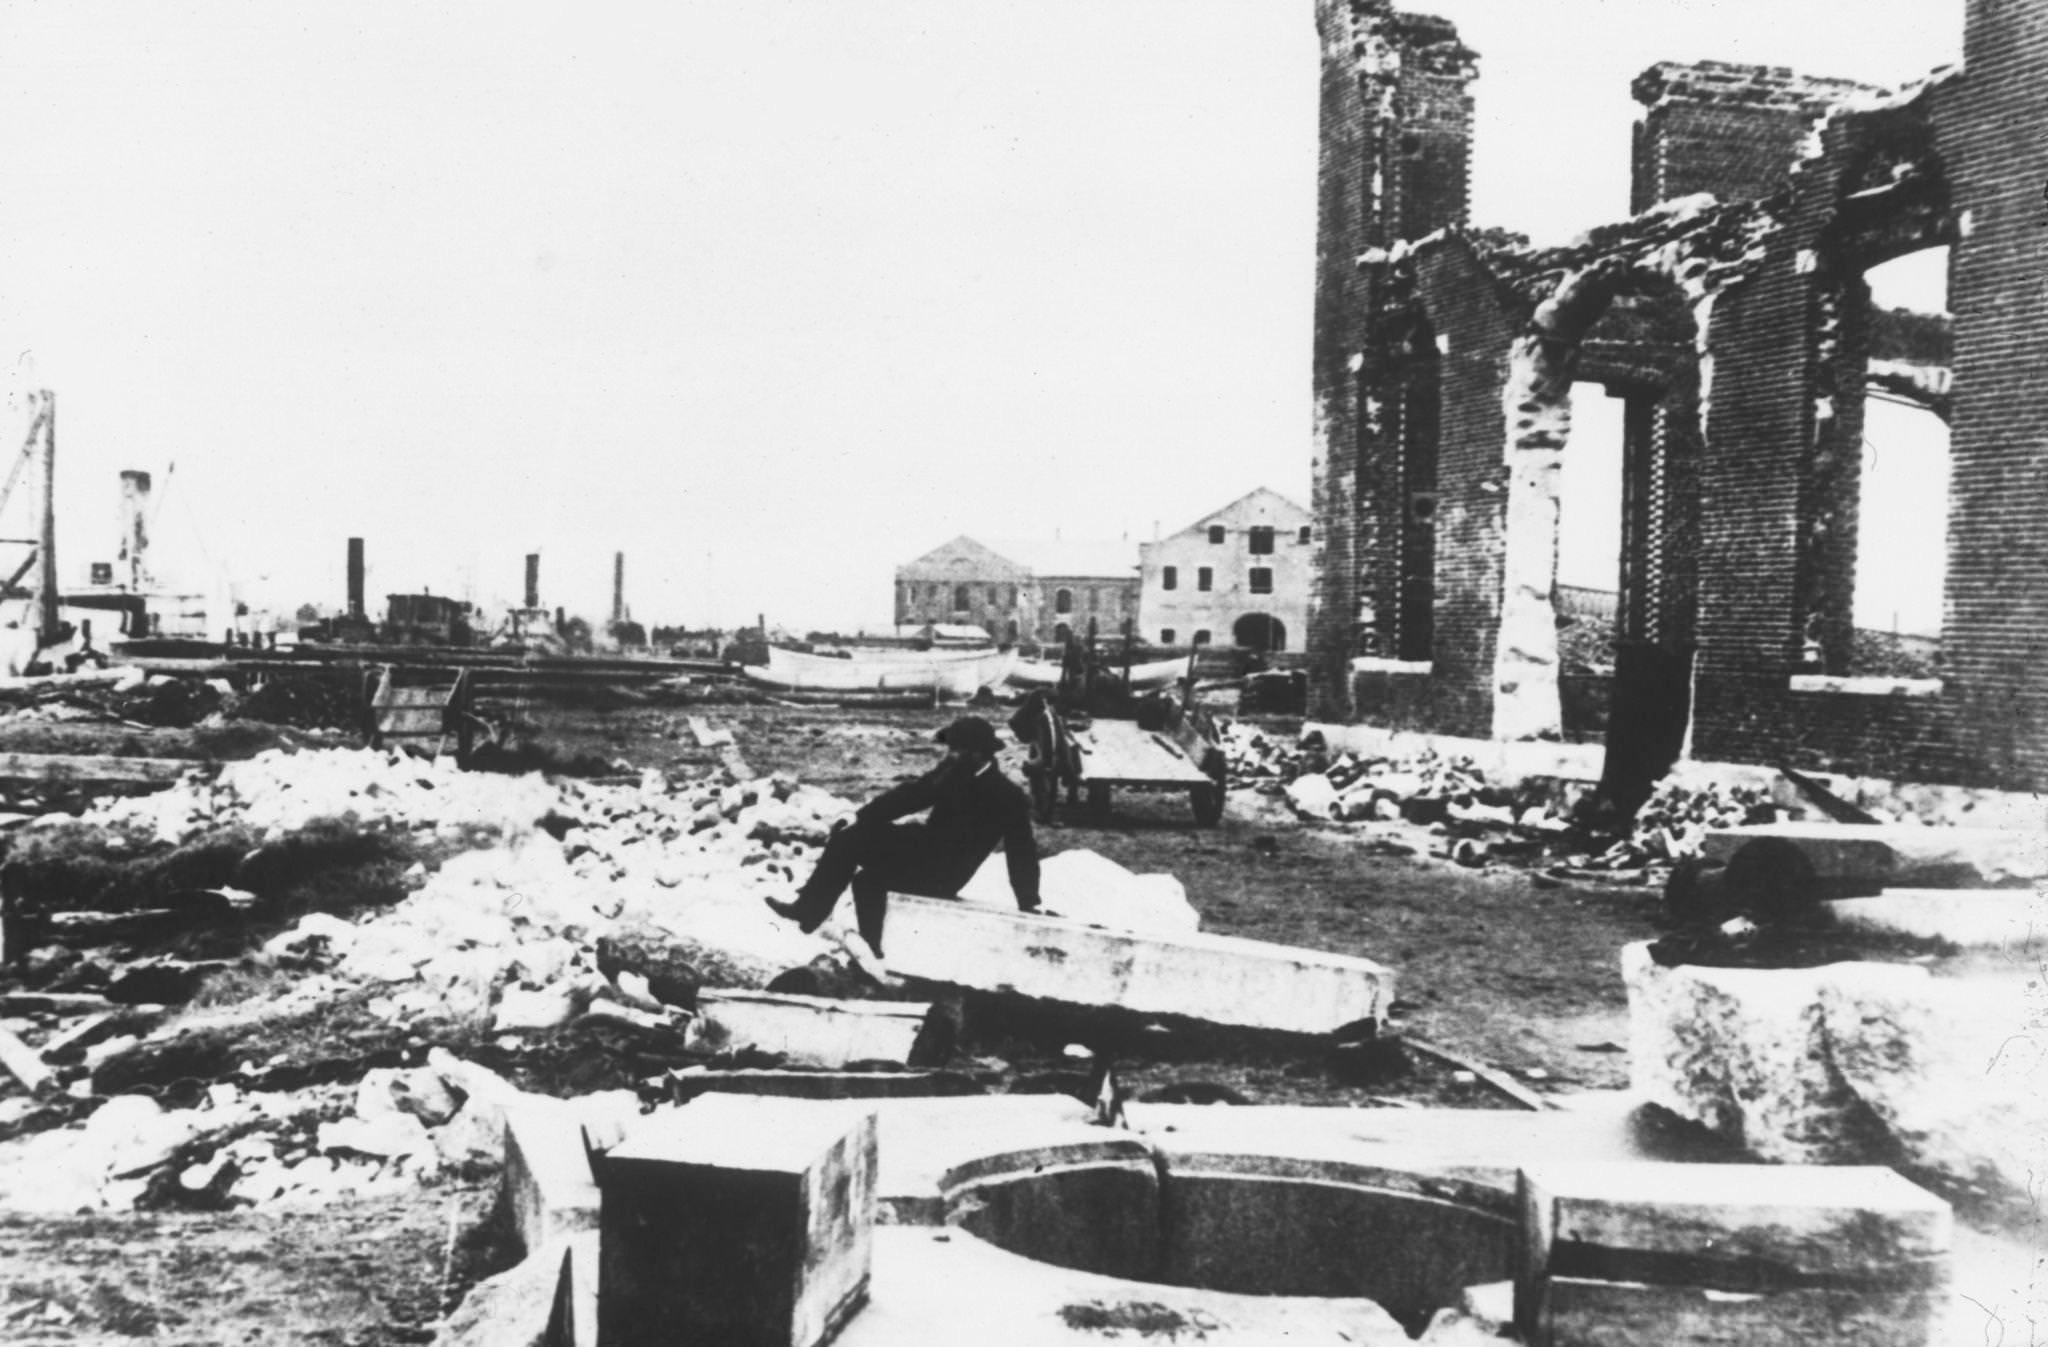 The ruins of the Norfolk Naval Shipyard damaged during the American Civil War, 1864